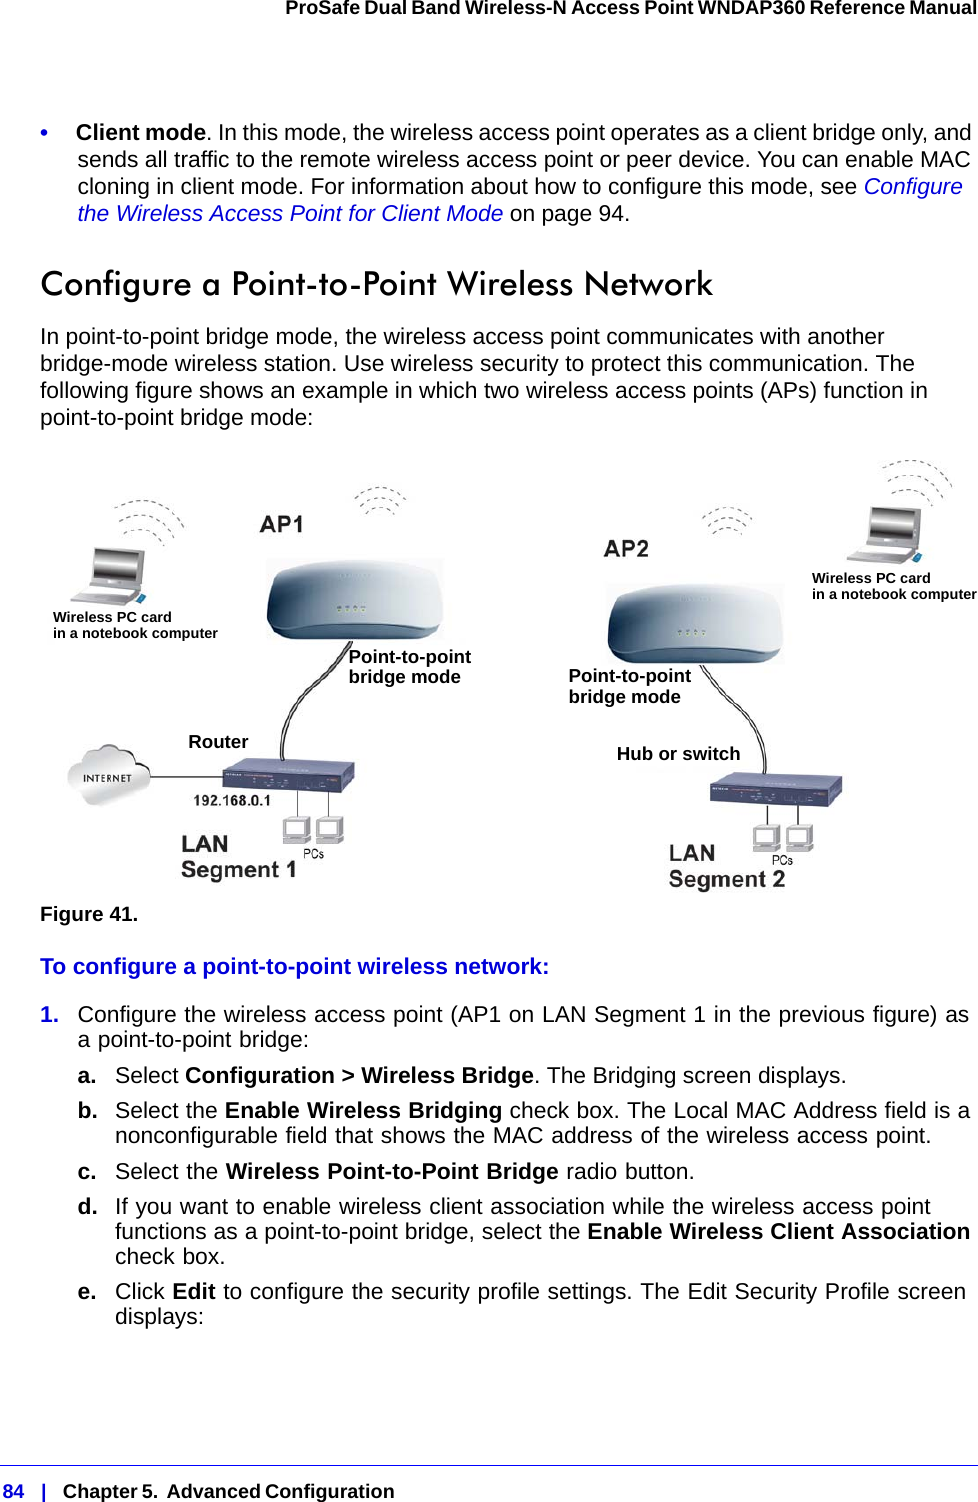 84   |   Chapter 5.  Advanced Configuration  ProSafe Dual Band Wireless-N Access Point WNDAP360 Reference Manual •     Client mode. In this mode, the wireless access point operates as a client bridge only, and sends all traffic to the remote wireless access point or peer device. You can enable MAC cloning in client mode. For information about how to configure this mode, see Configure the Wireless Access Point for Client Mode on page 94.Configure a Point-to-Point Wireless NetworkIn point-to-point bridge mode, the wireless access point communicates with another bridge-mode wireless station. Use wireless security to protect this communication. The following figure shows an example in which two wireless access points (APs) function in point-to-point bridge mode:Figure 41. To configure a point-to-point wireless network:1.  Configure the wireless access point (AP1 on LAN Segment 1 in the previous figure) as a point-to-point bridge:a. Select Configuration &gt; Wireless Bridge. The Bridging screen displays.b.  Select the Enable Wireless Bridging check box. The Local MAC Address field is a nonconfigurable field that shows the MAC address of the wireless access point.c.  Select the Wireless Point-to-Point Bridge radio button.d.  If you want to enable wireless client association while the wireless access point functions as a point-to-point bridge, select the Enable Wireless Client Association check box.e.  Click Edit to configure the security profile settings. The Edit Security Profile screen displays:Wireless PC cardin a notebook computerWireless PC cardin a notebook computerPoint-to-pointbridge mode Point-to-pointbridge modeRouter Hub or switch